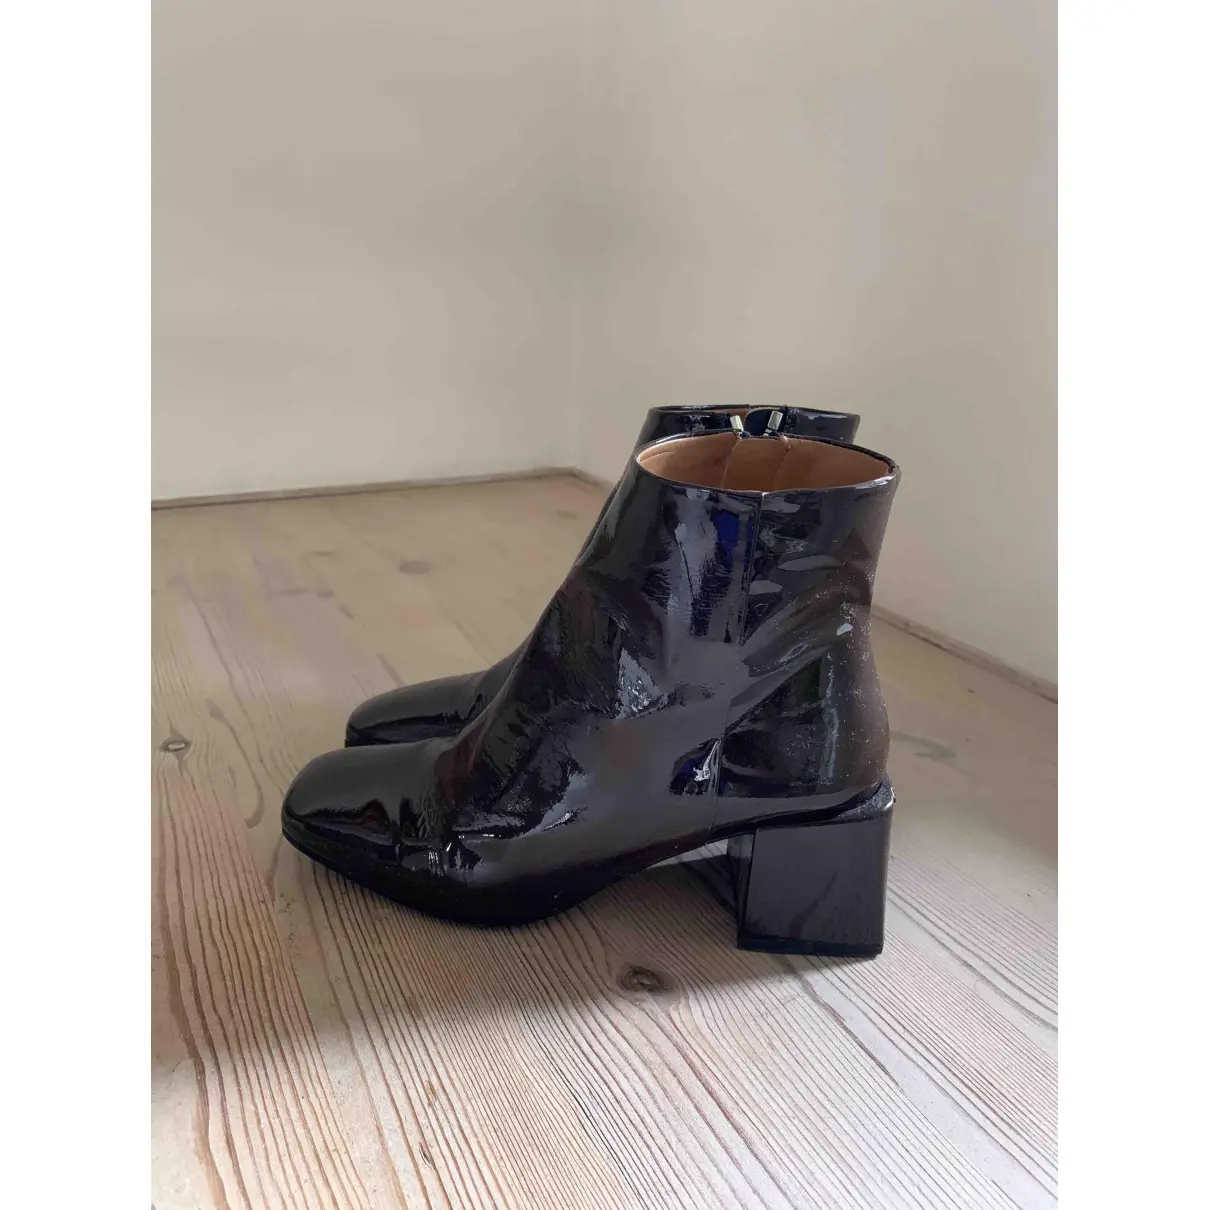 Buy Loq Patent leather ankle boots online